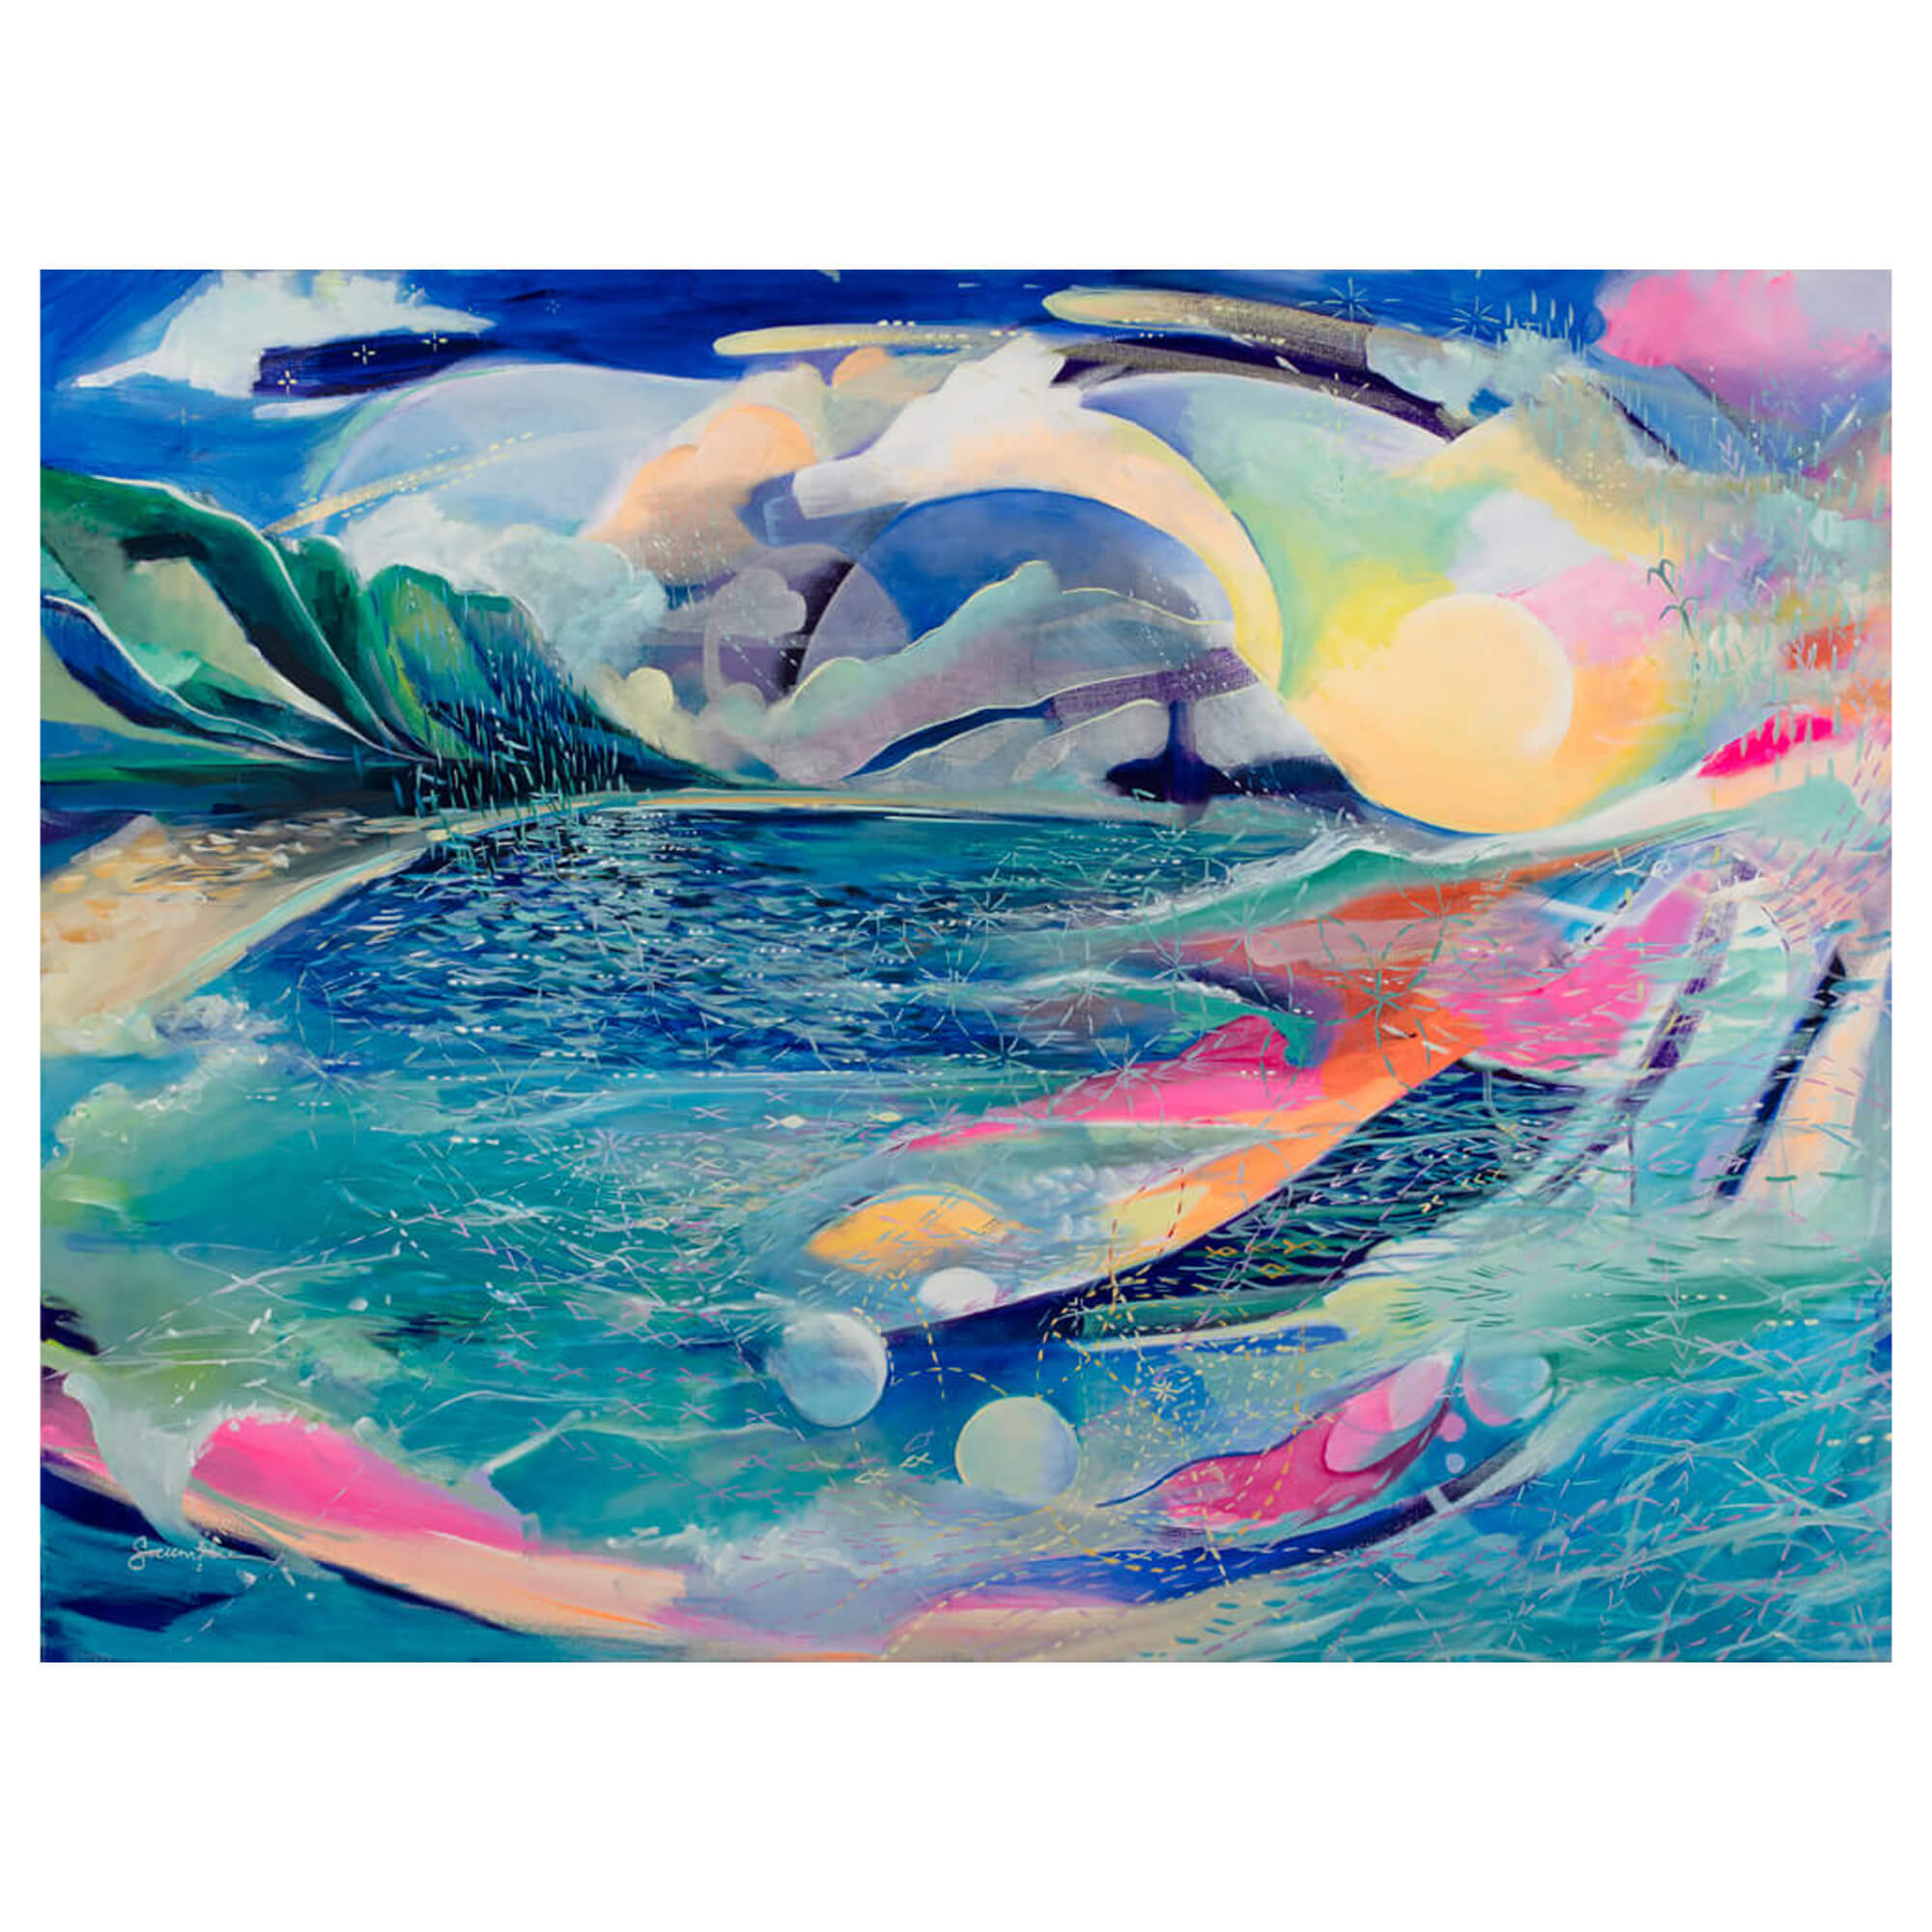 A paper art print of an abstract artwork of a seascape with vibrant pastel colors Hawaii artist Saumolia Puapuaga 